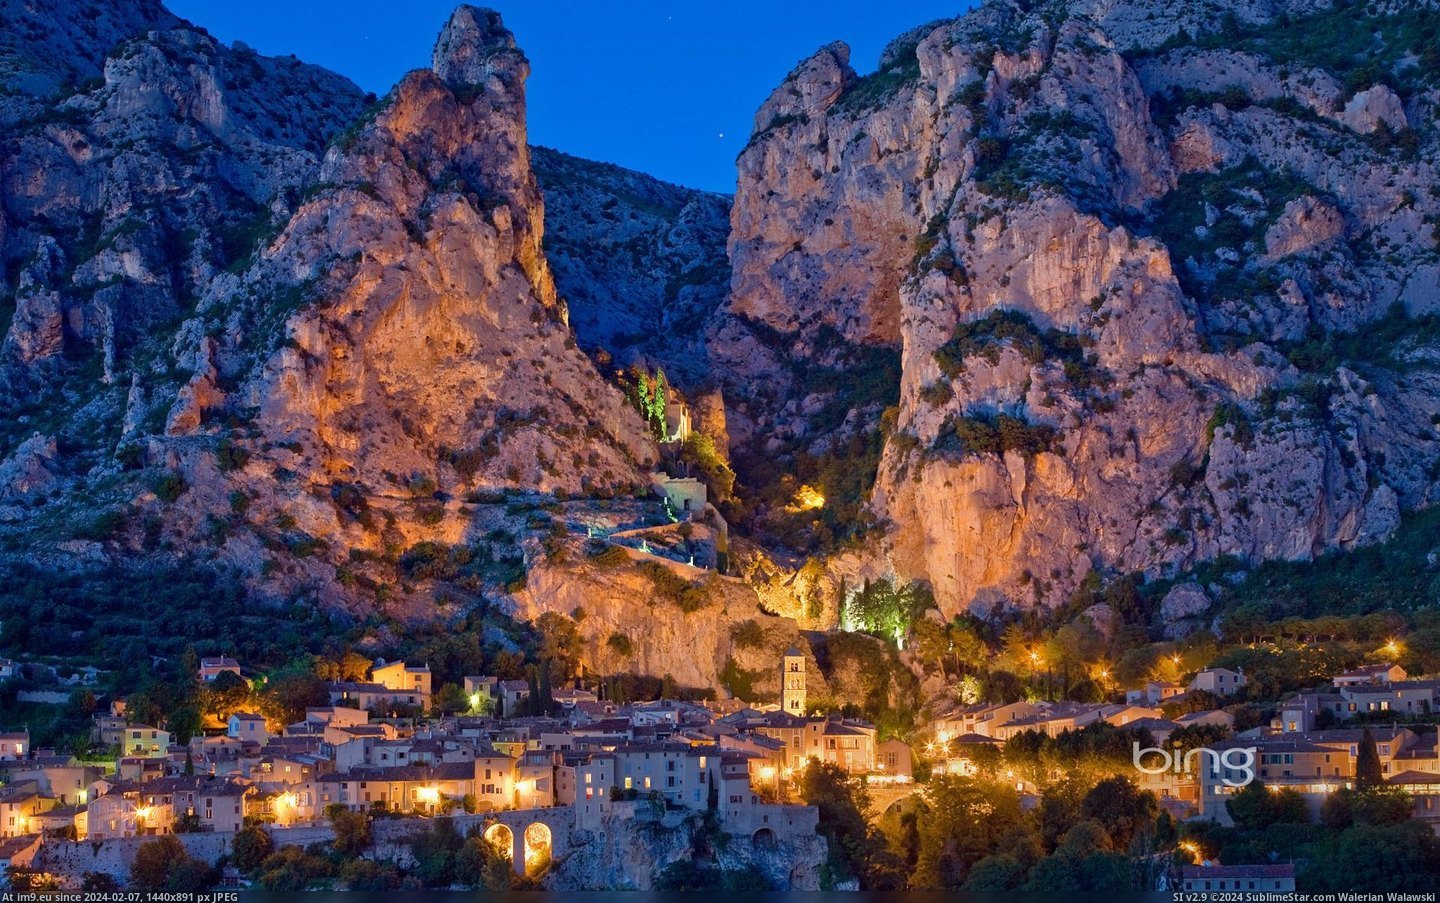 Village of Moustiers Sainte-Marie, Provence-Alpes-Cote d'Azur, France (©Getty Images) (in Best photos of January 2013)